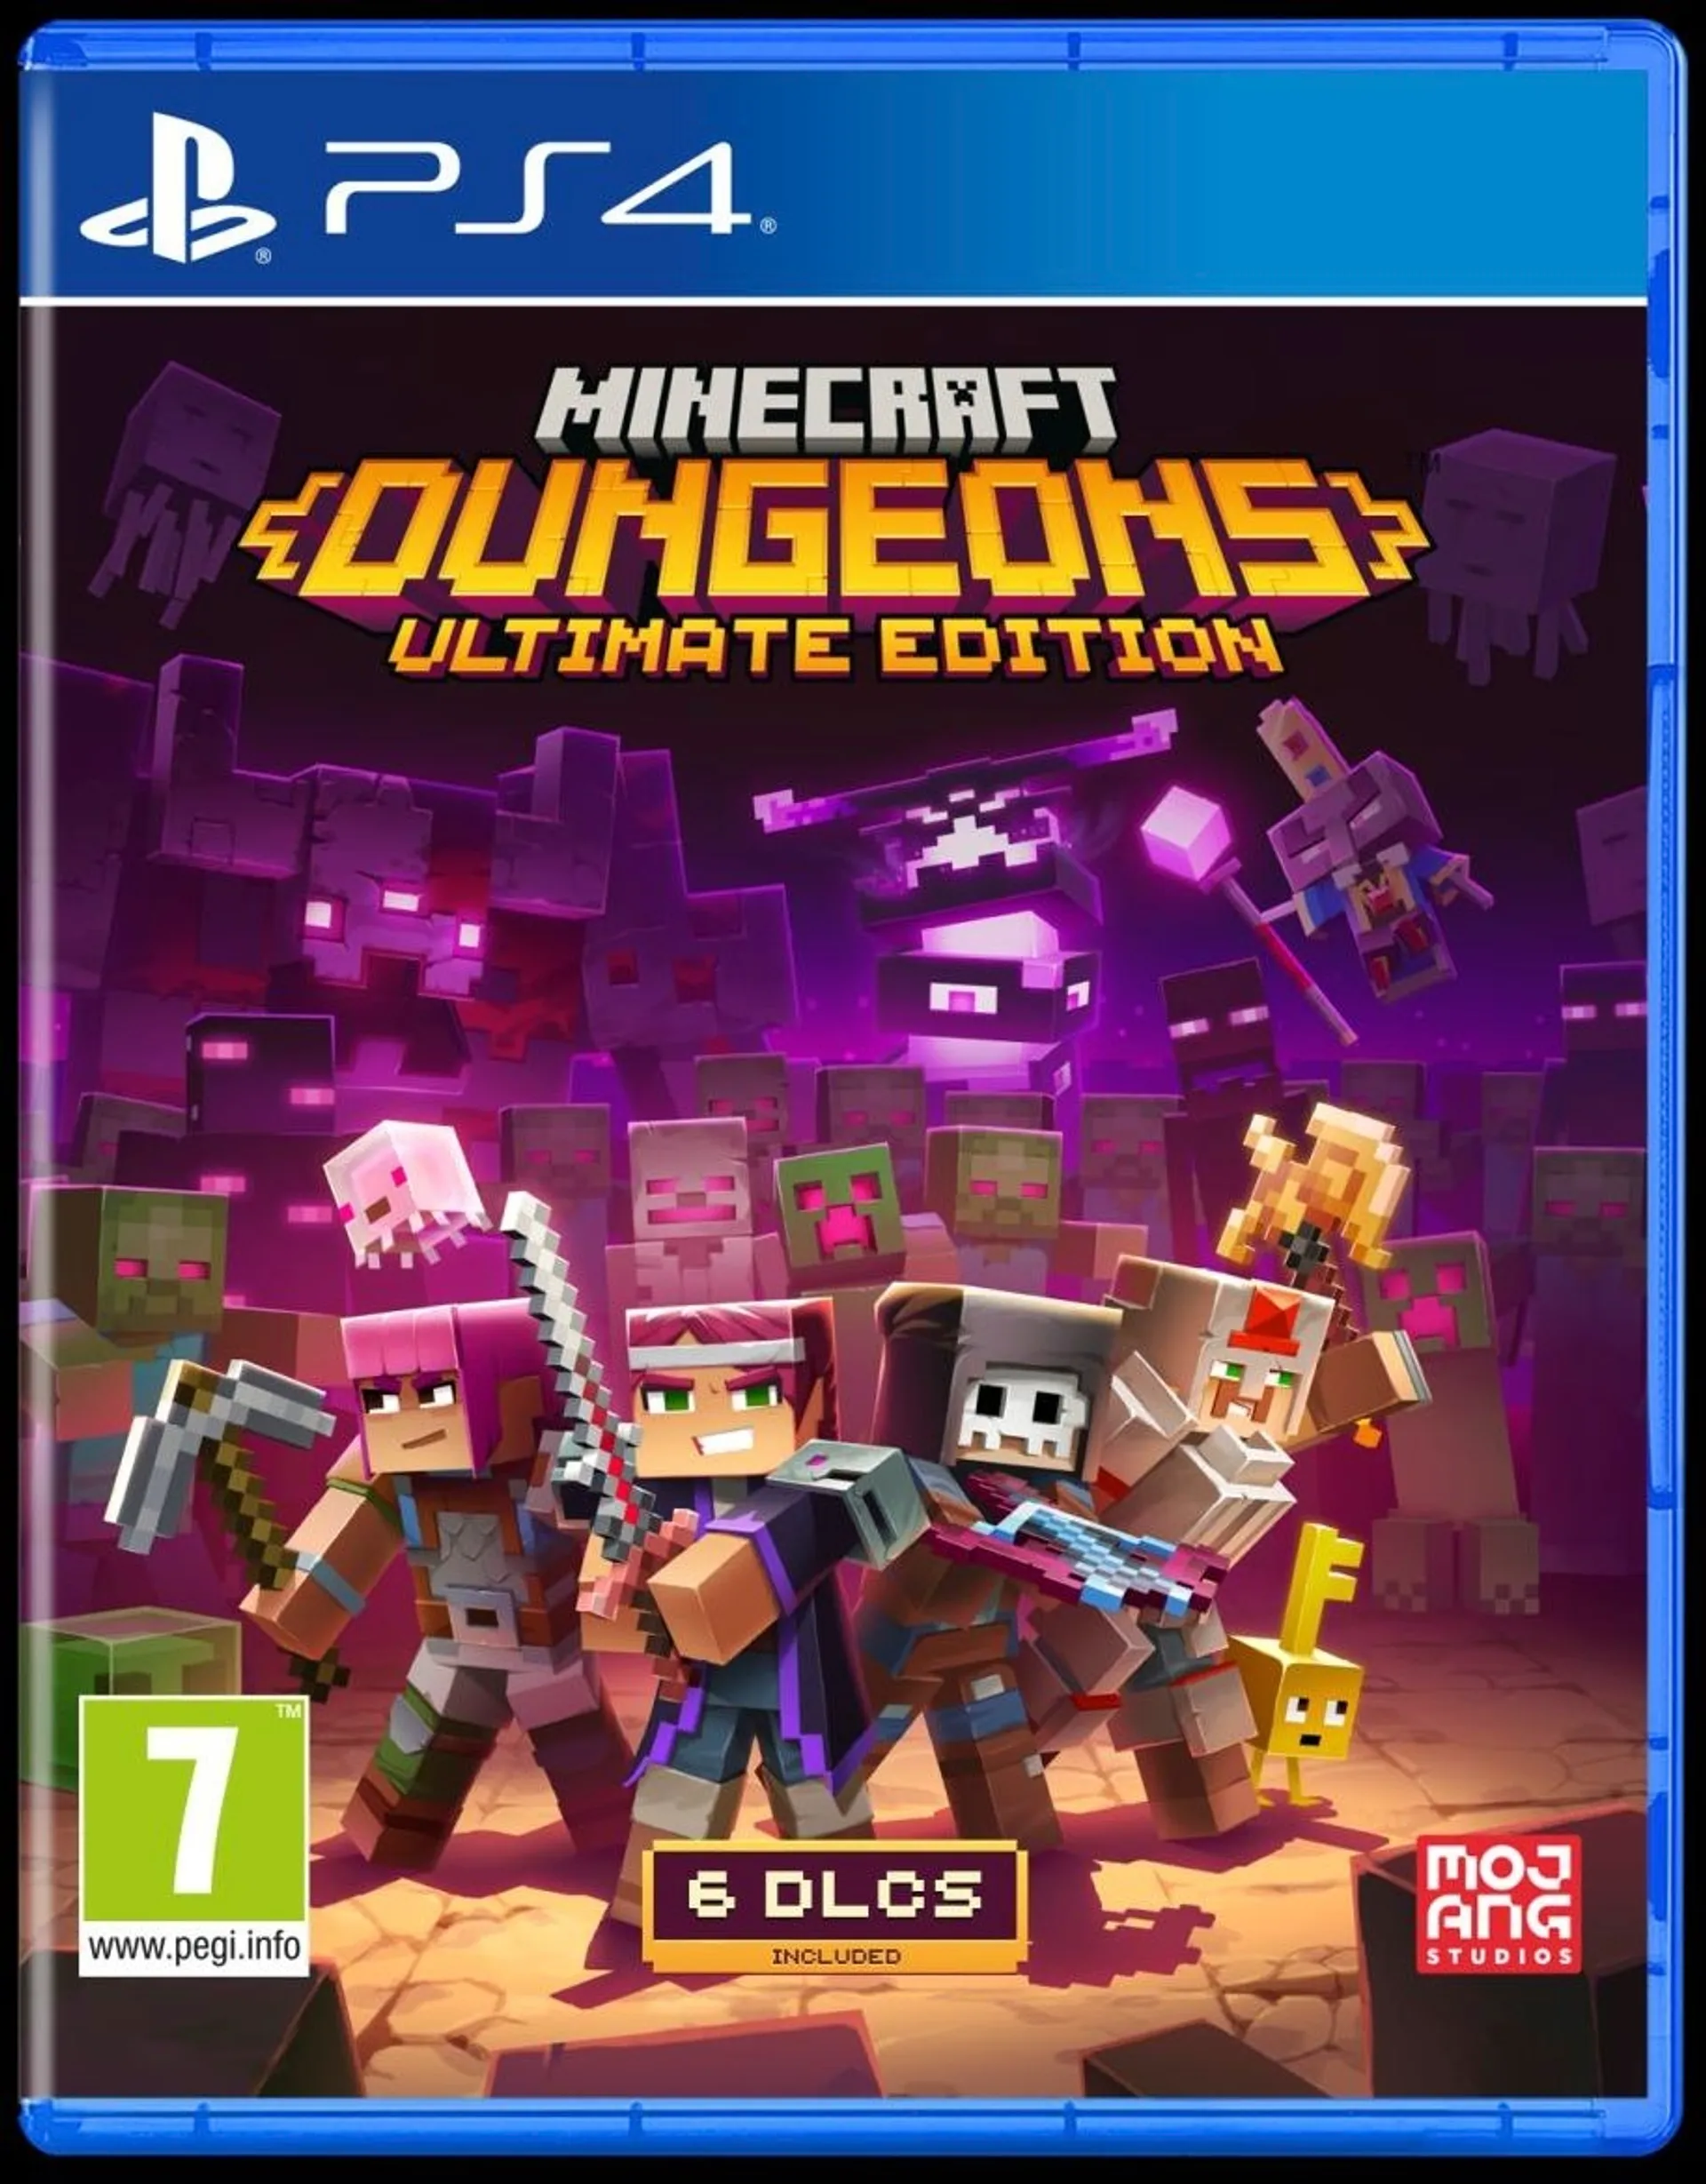 PlayStation 4 Minecraft Dungeons Hero Edition Ultimate Edition